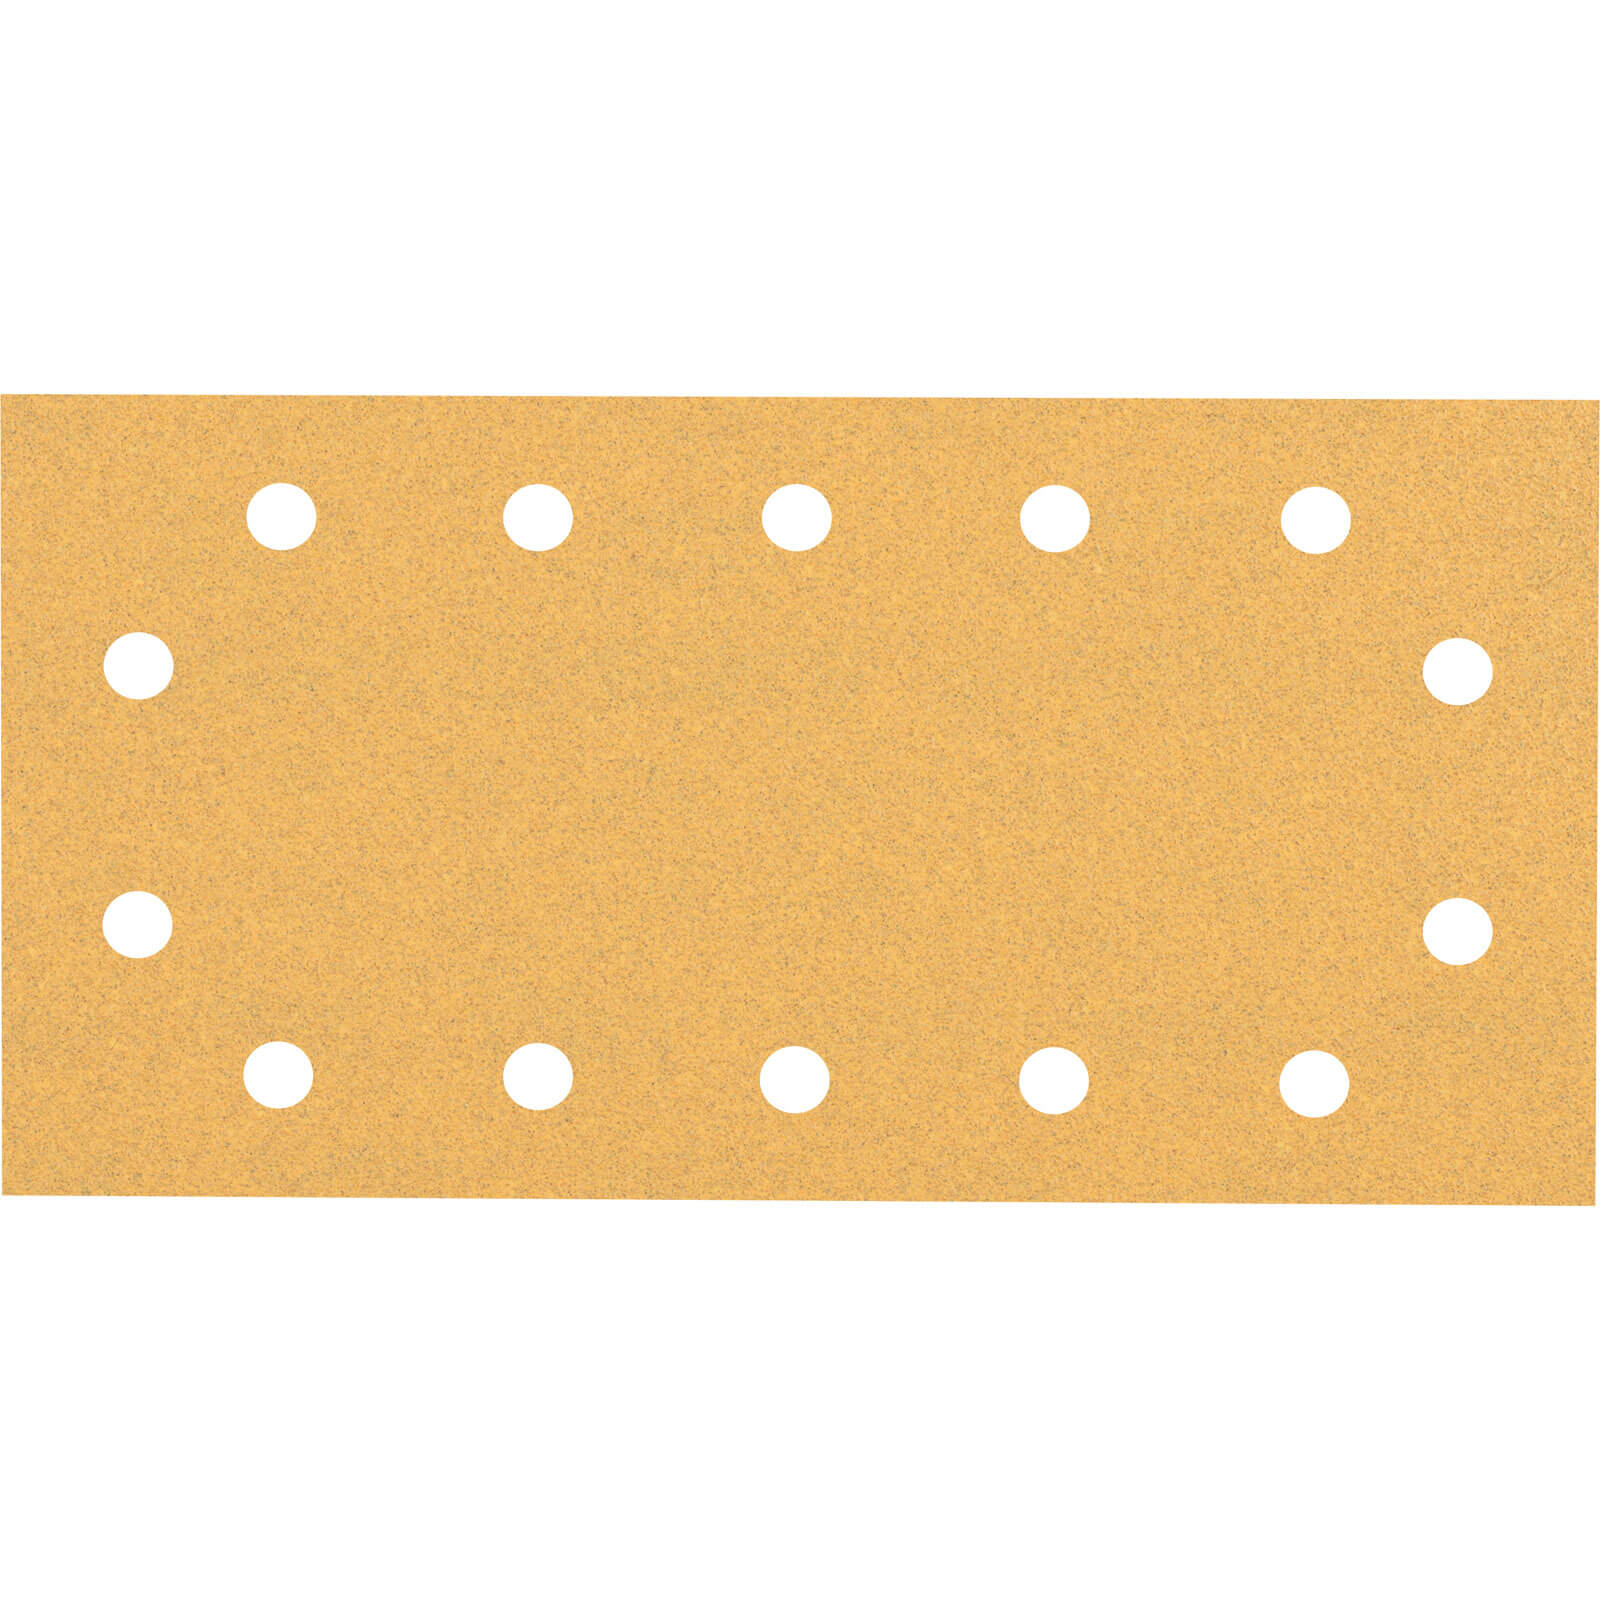 Image of Bosch Expert C470 Punched Hook and Loop 1/2 Sanding Sheets 115mm x 230mm 100g Pack of 50